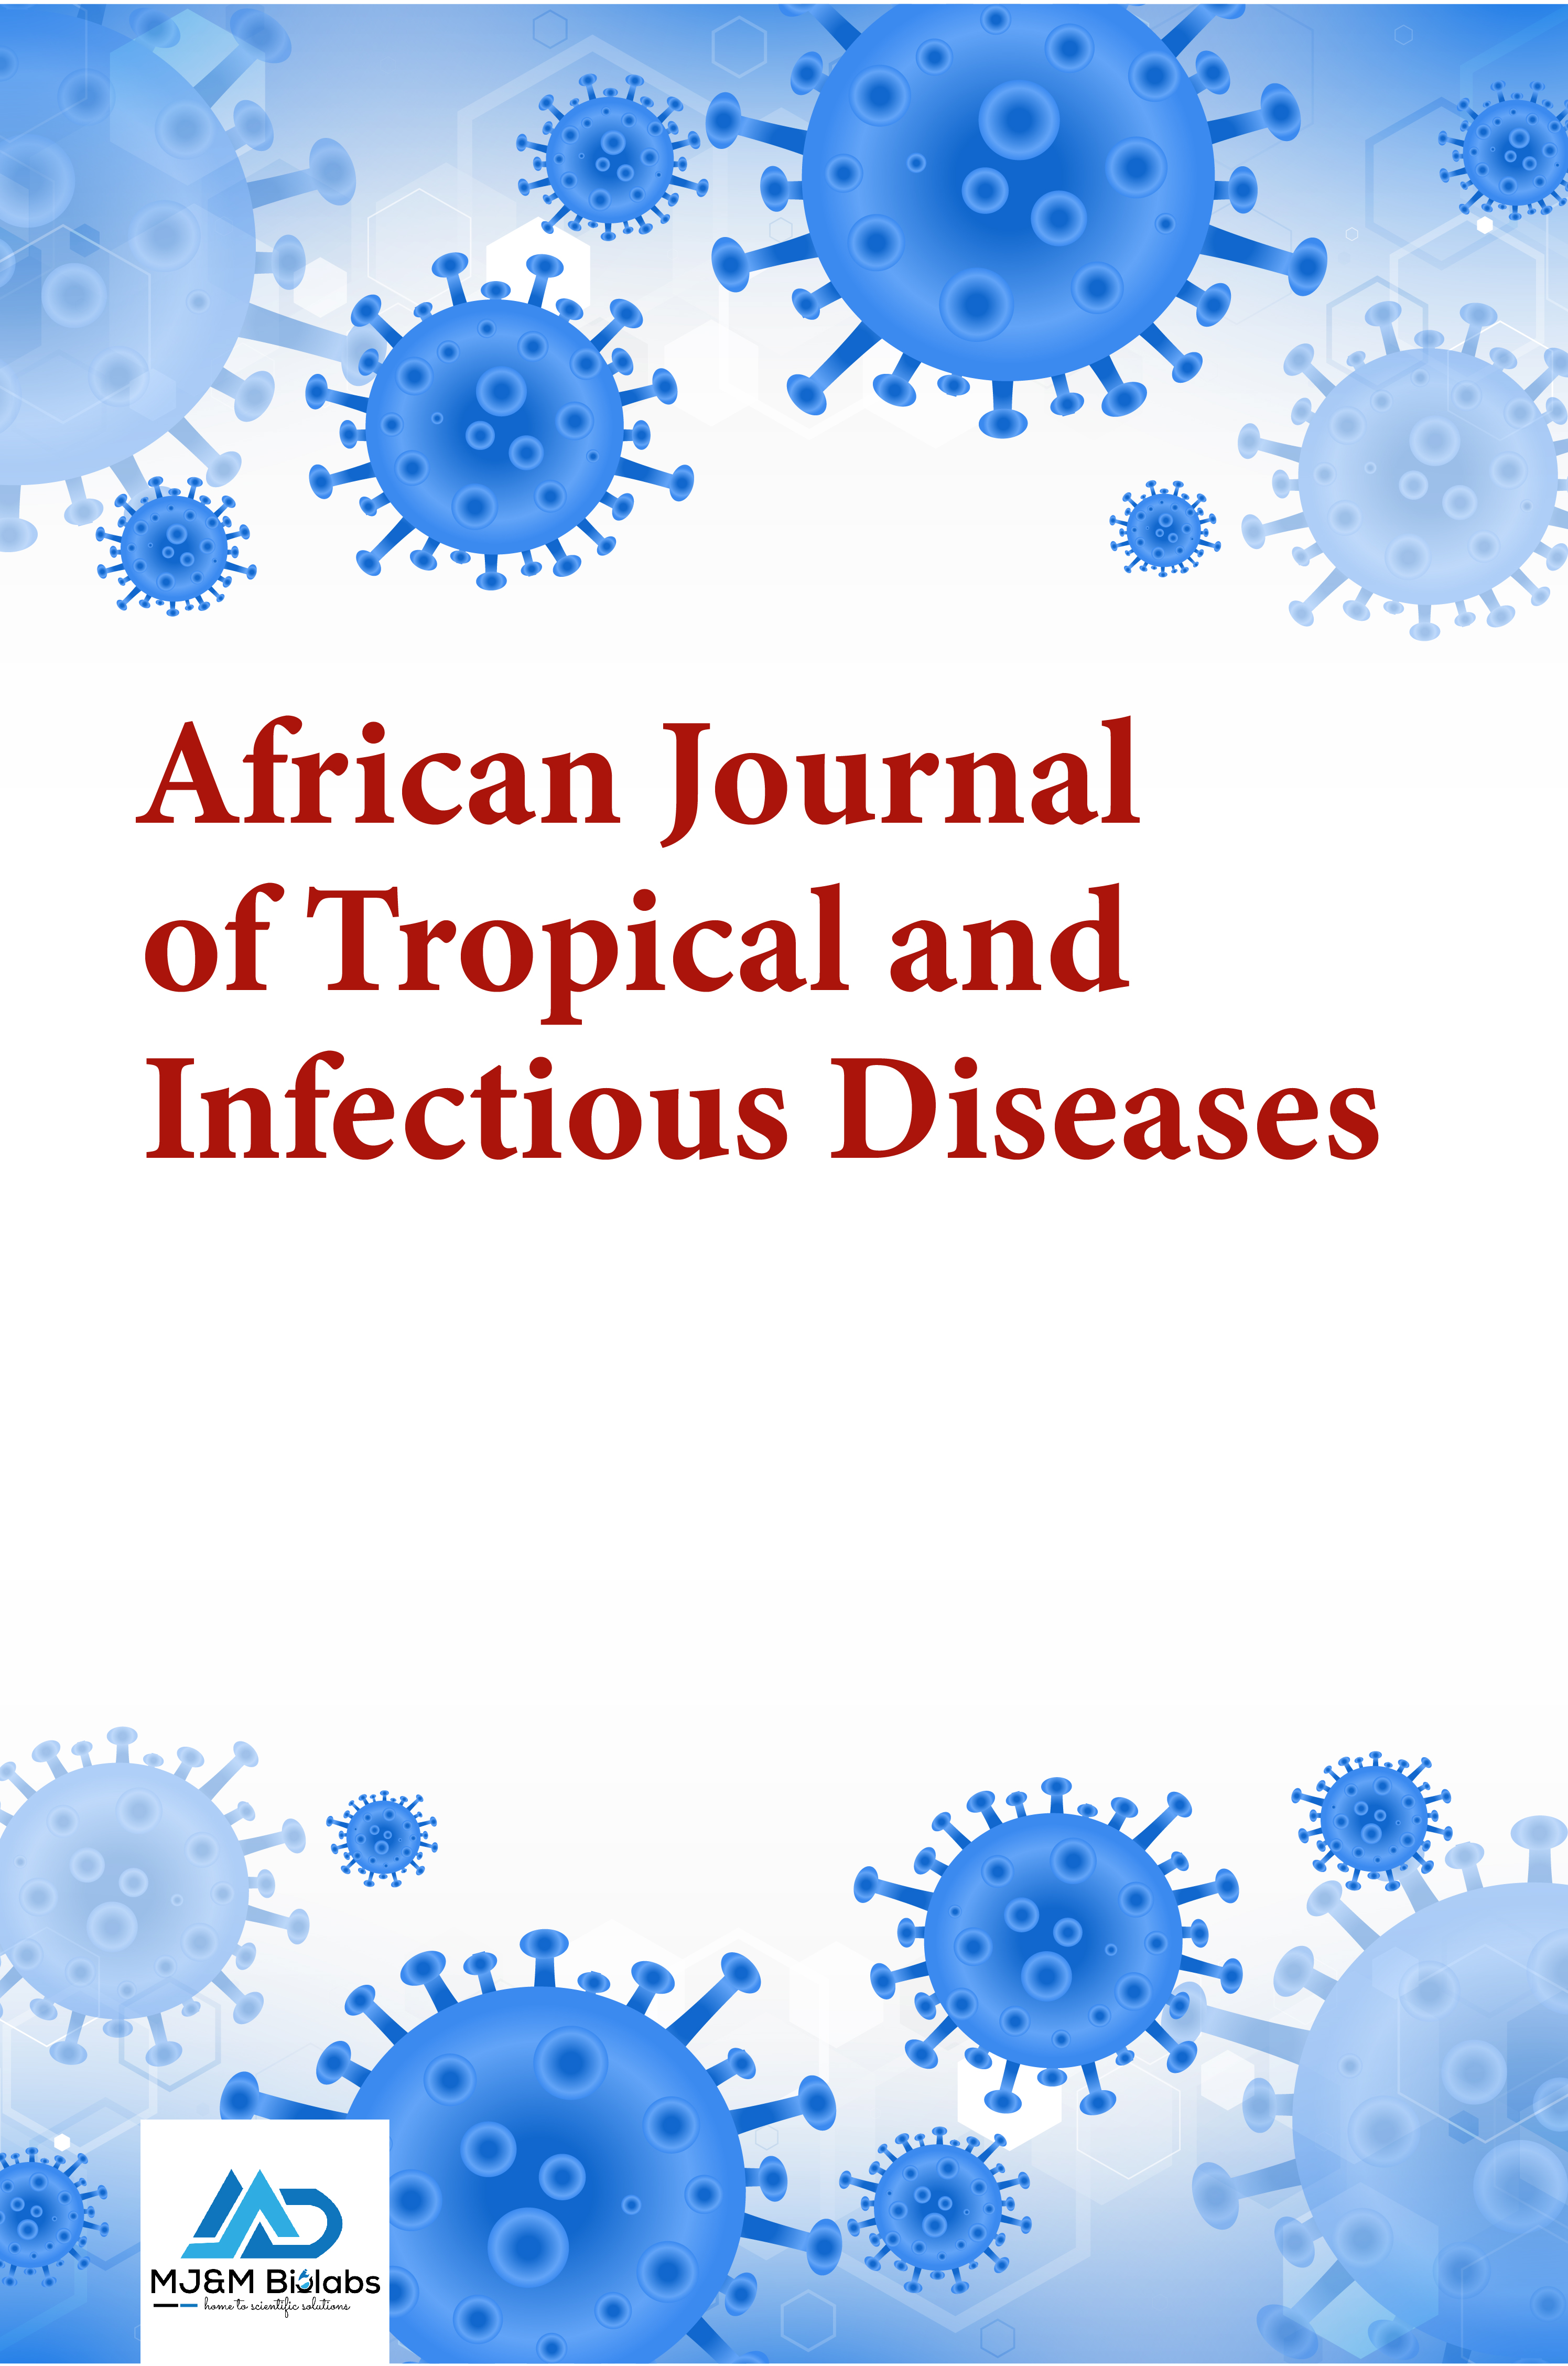 African Journal of Tropical and Infectious Diseases